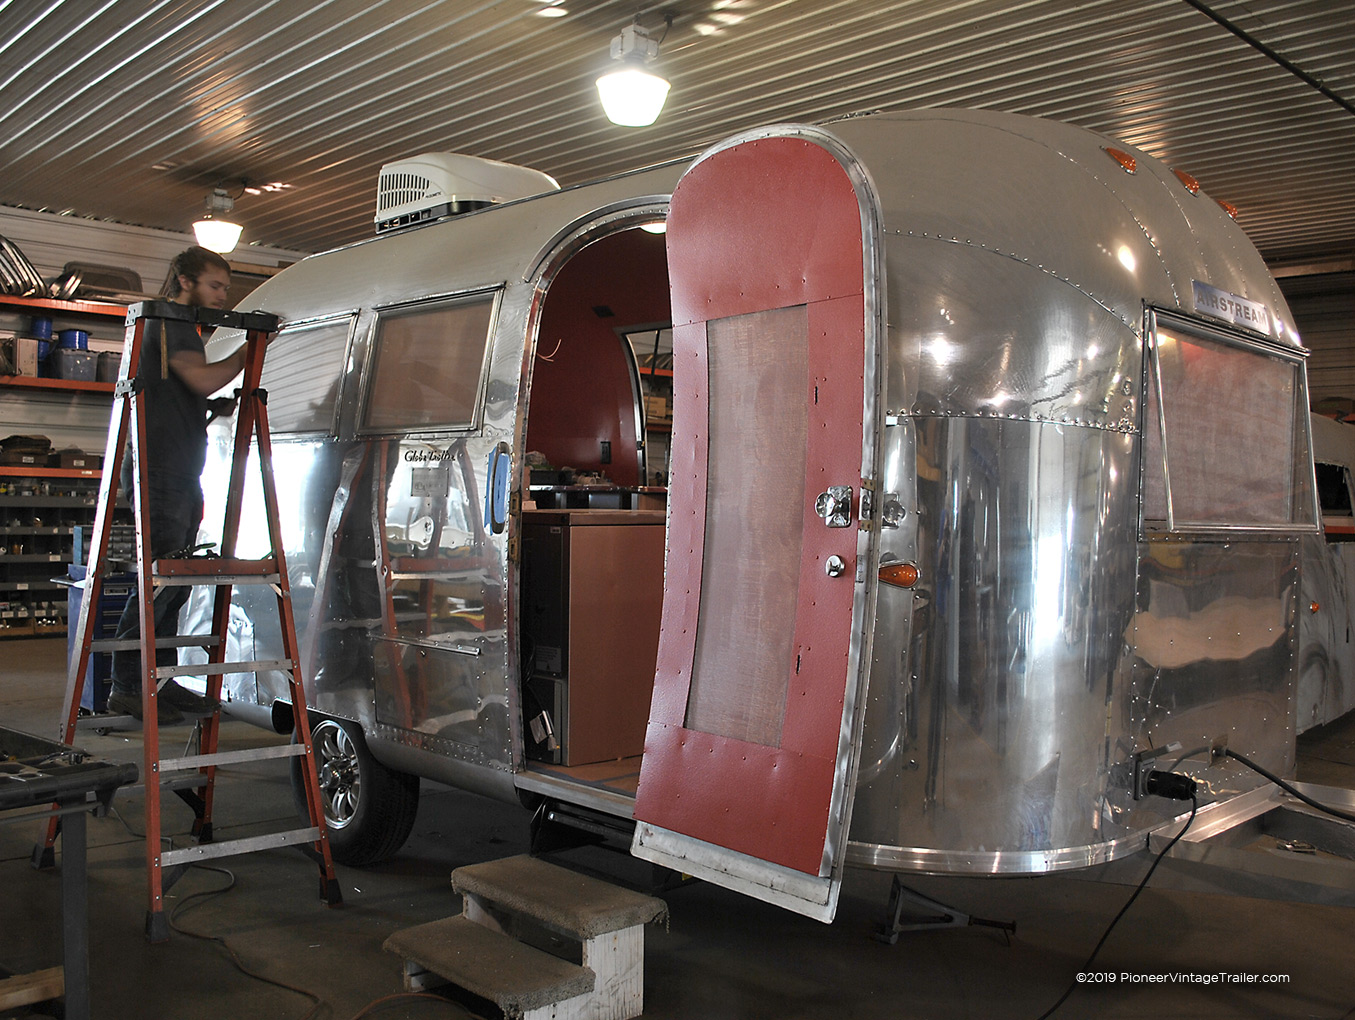 Airstream beer/cocktail trailer - exterior during construction